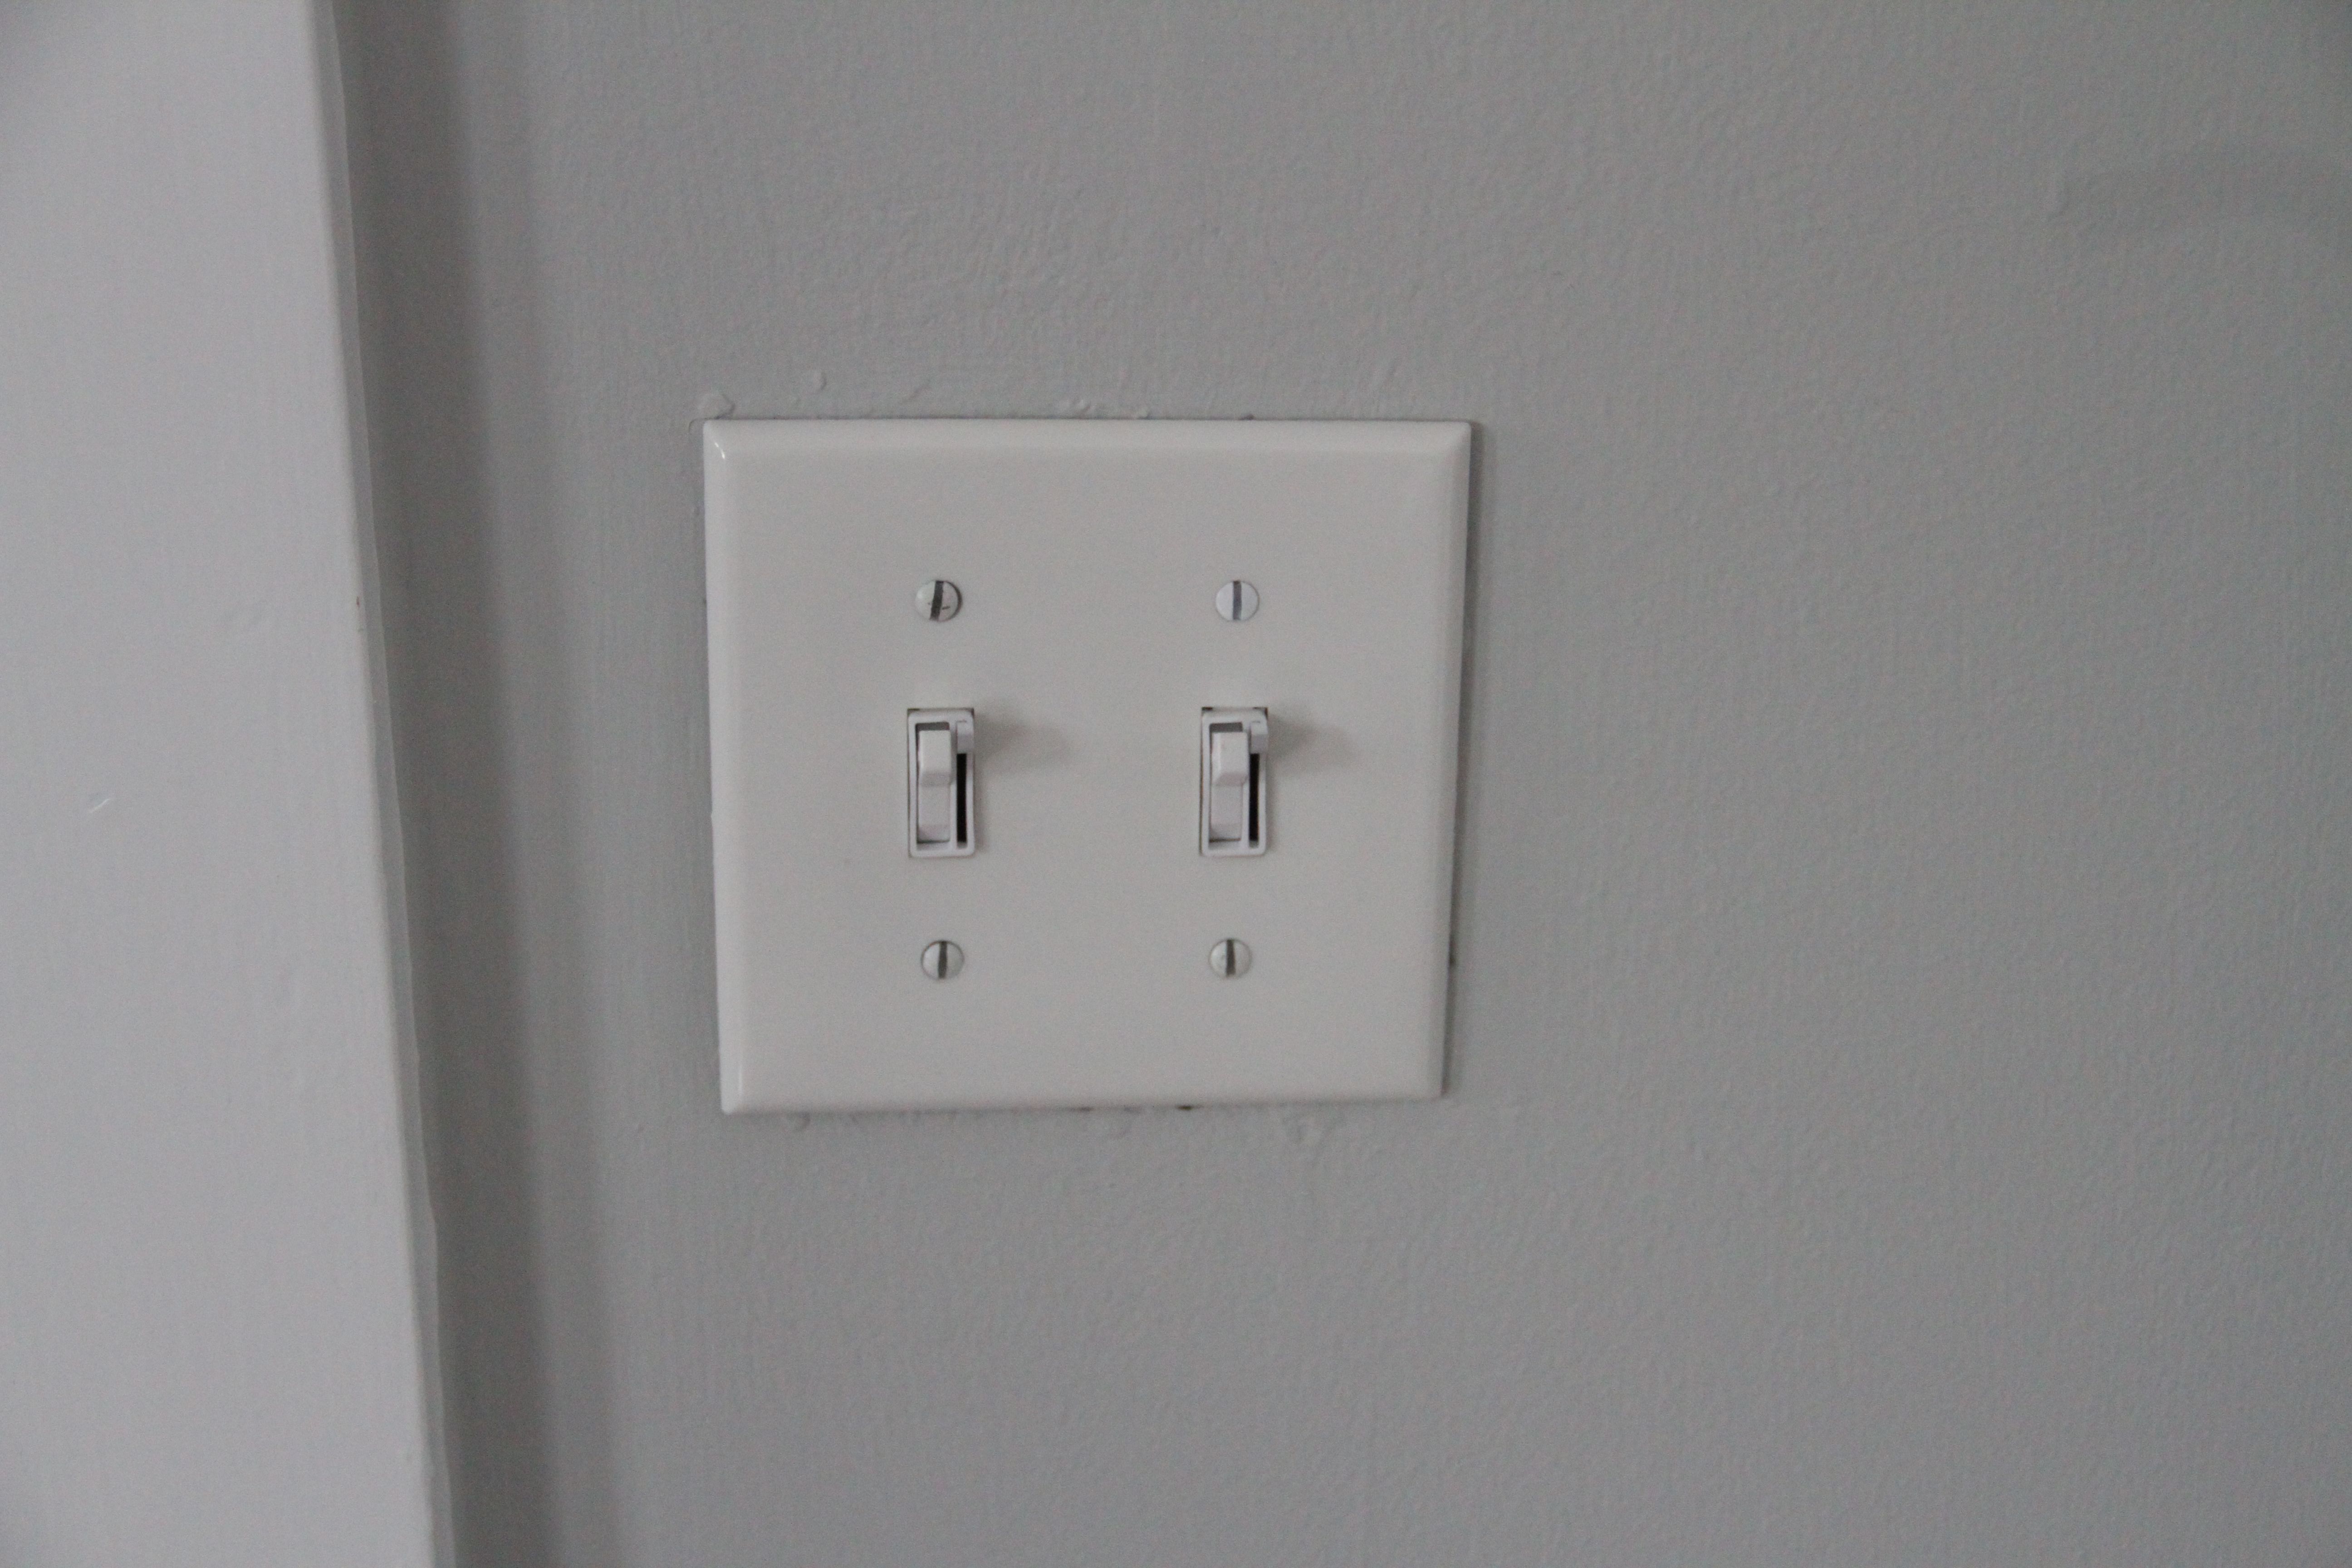 Jeff even installed the dimmers himself! (We still love you, Brad!)